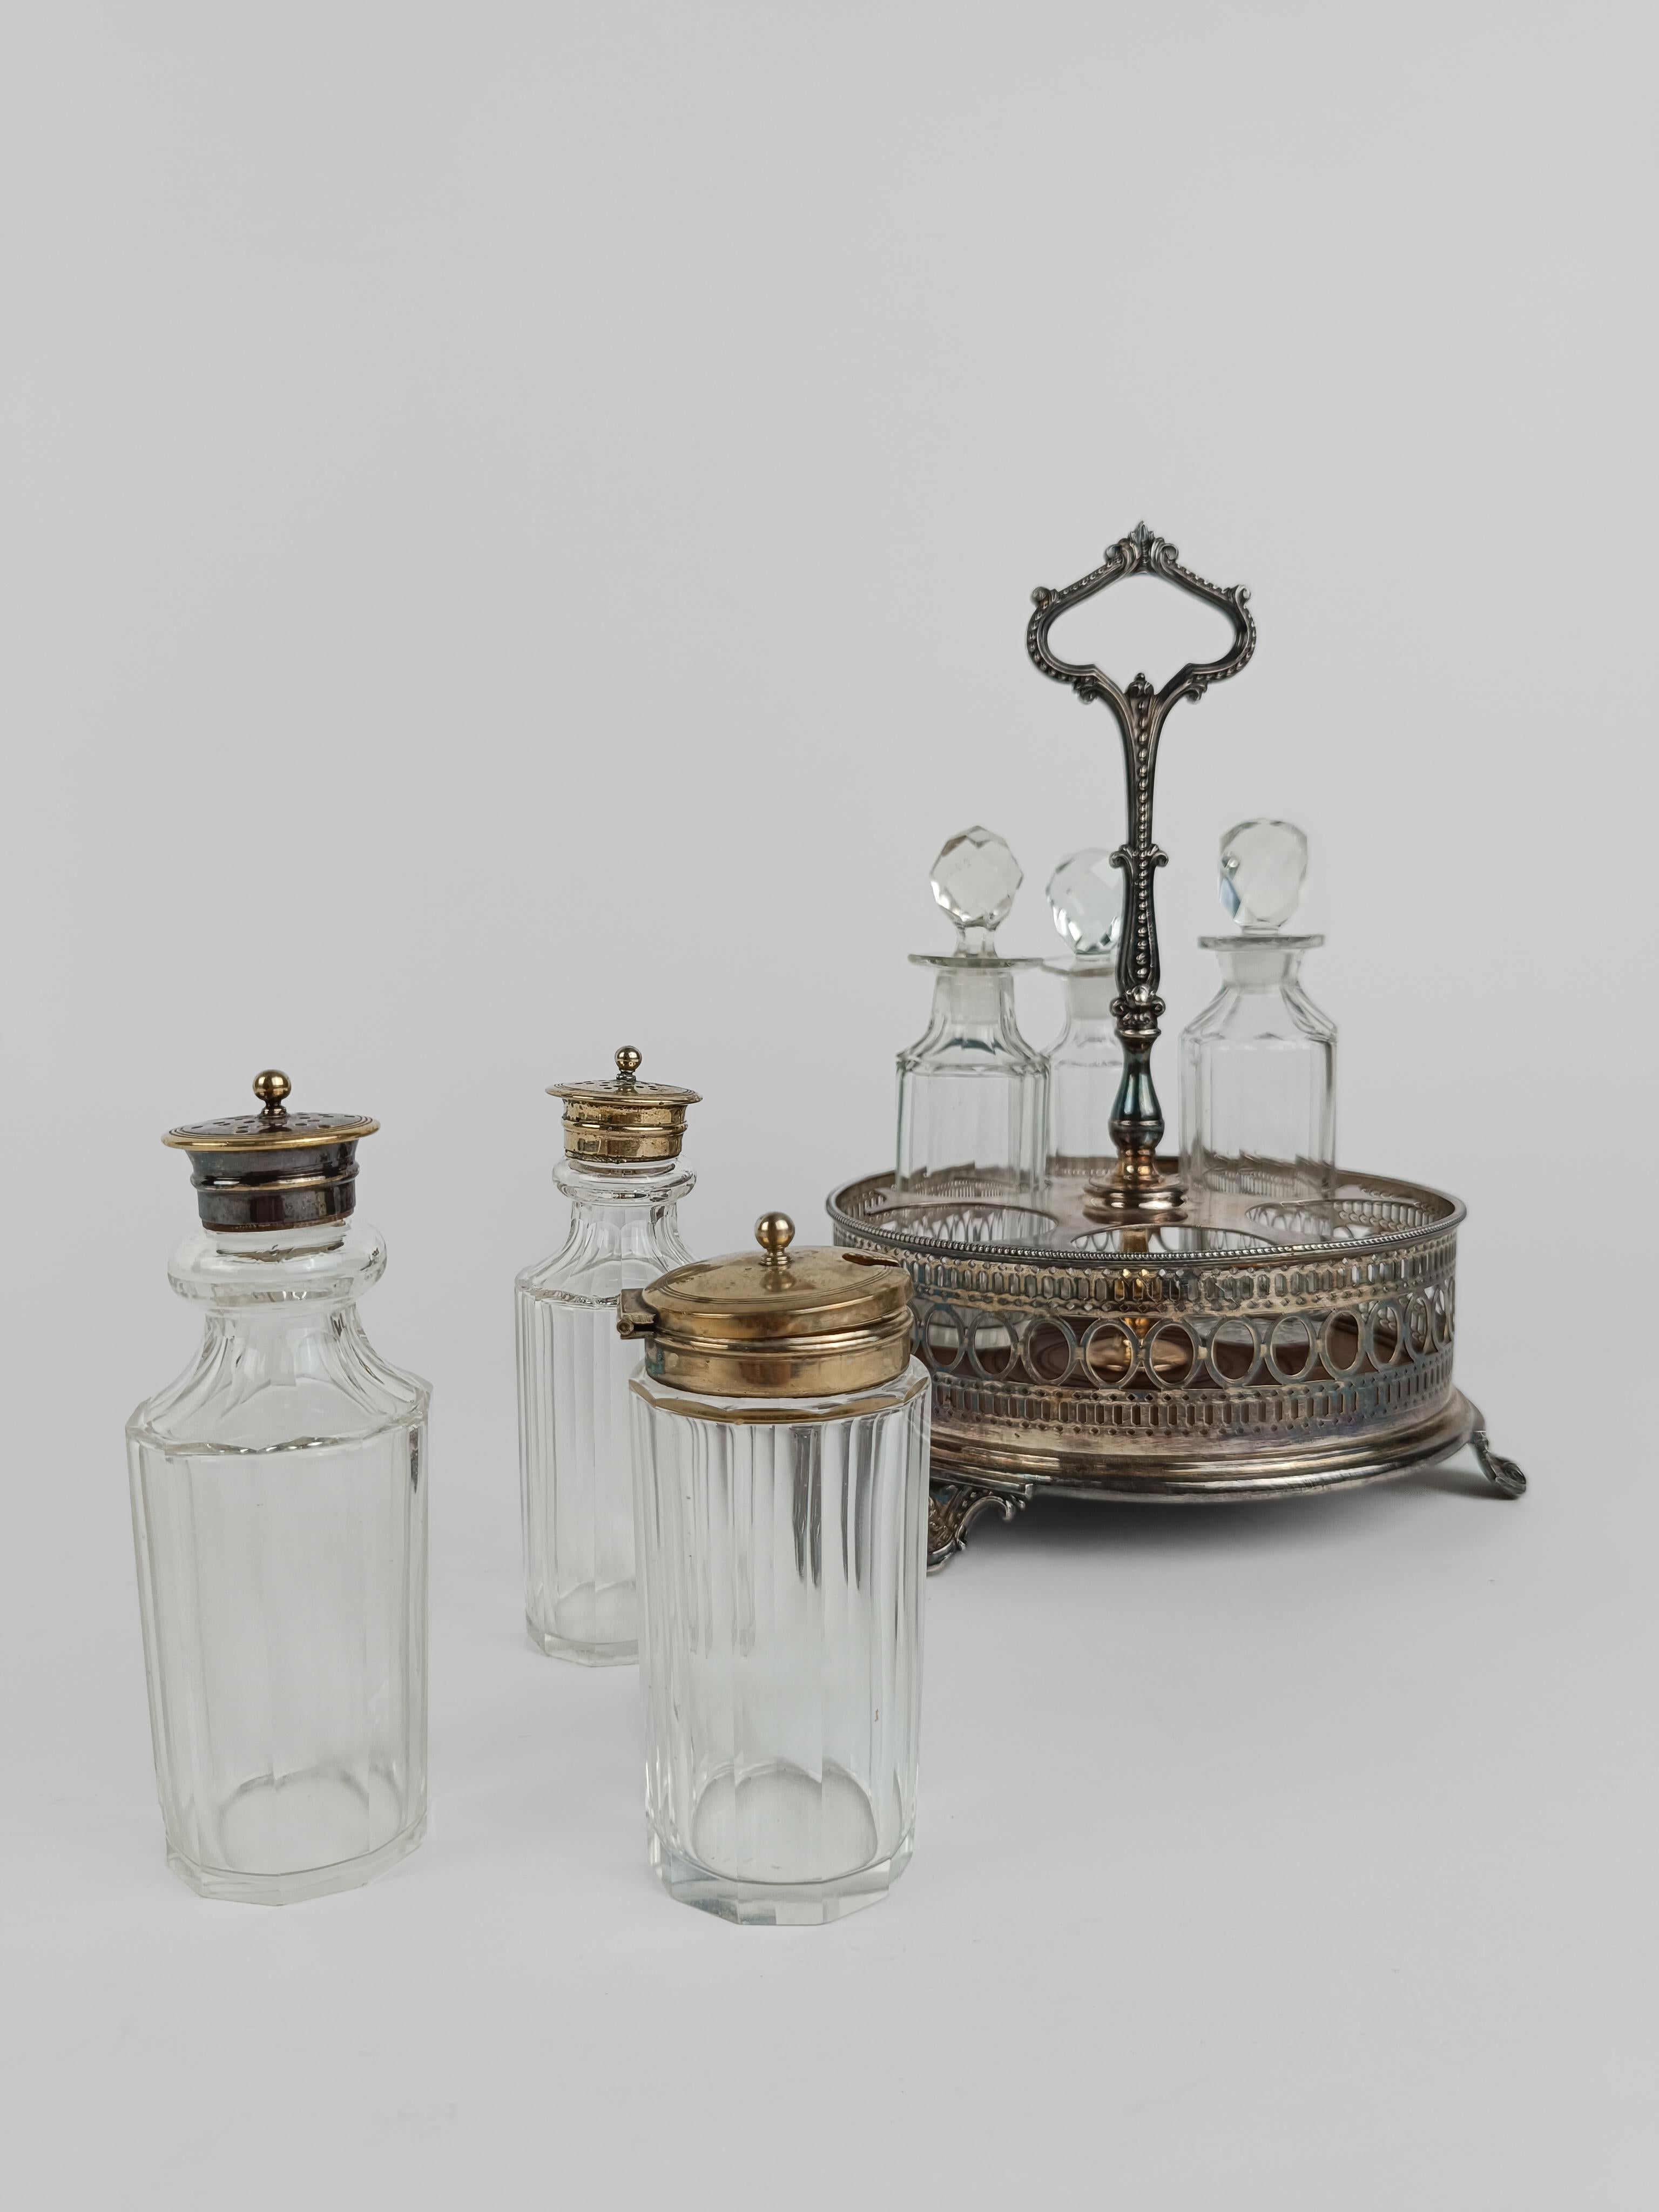 English Antique Sheffield England and Silver Plated Cruet Set with Cut Crystal Bottles For Sale